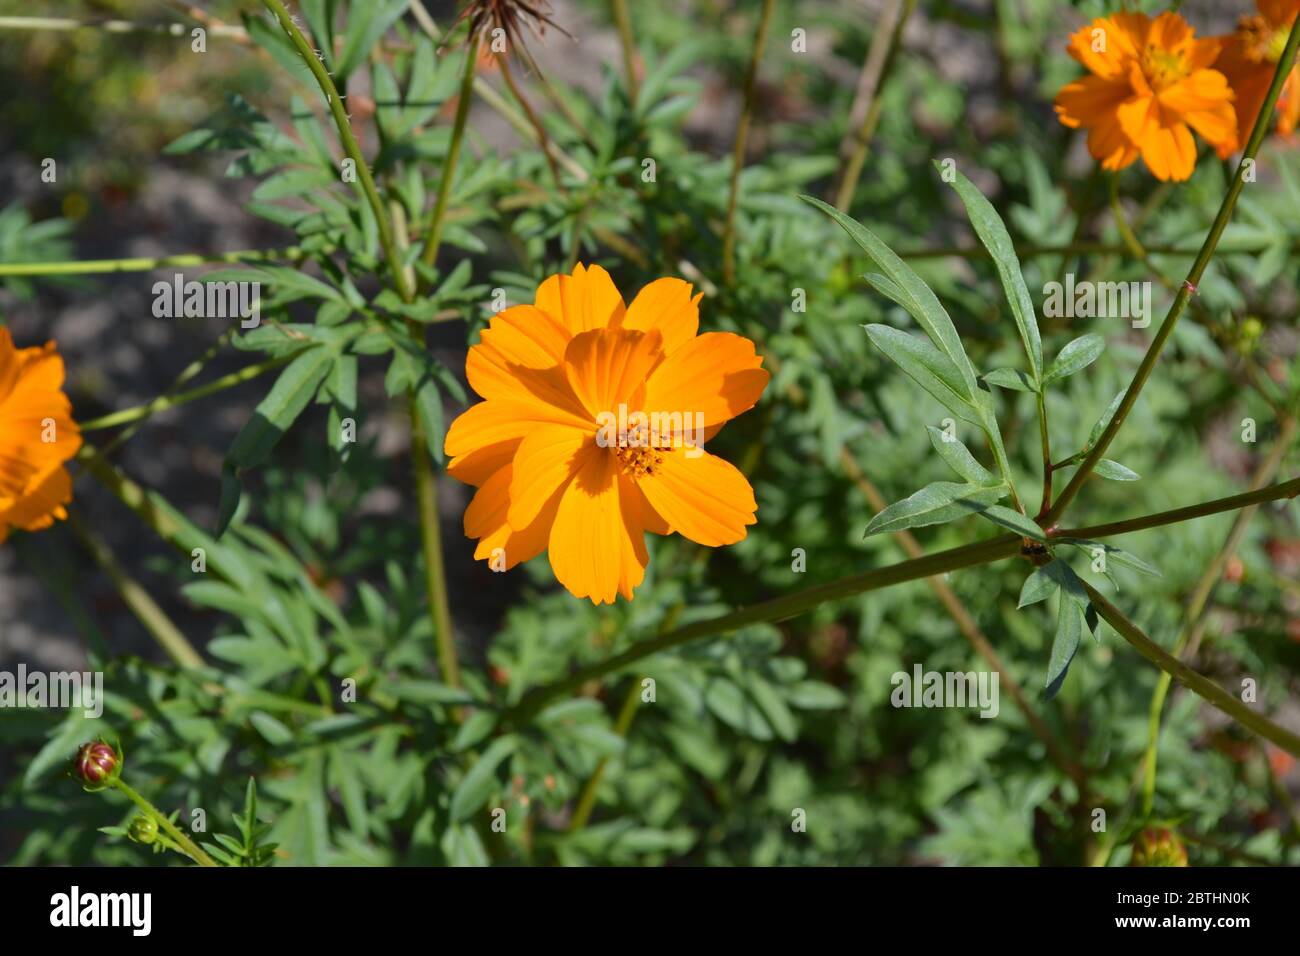 Sunny summer day. Homemade plant, gardening. Cosmos, a genus of annual and perennial herbaceous plants of the family Asteraceae. Flower. Orange flower Stock Photo